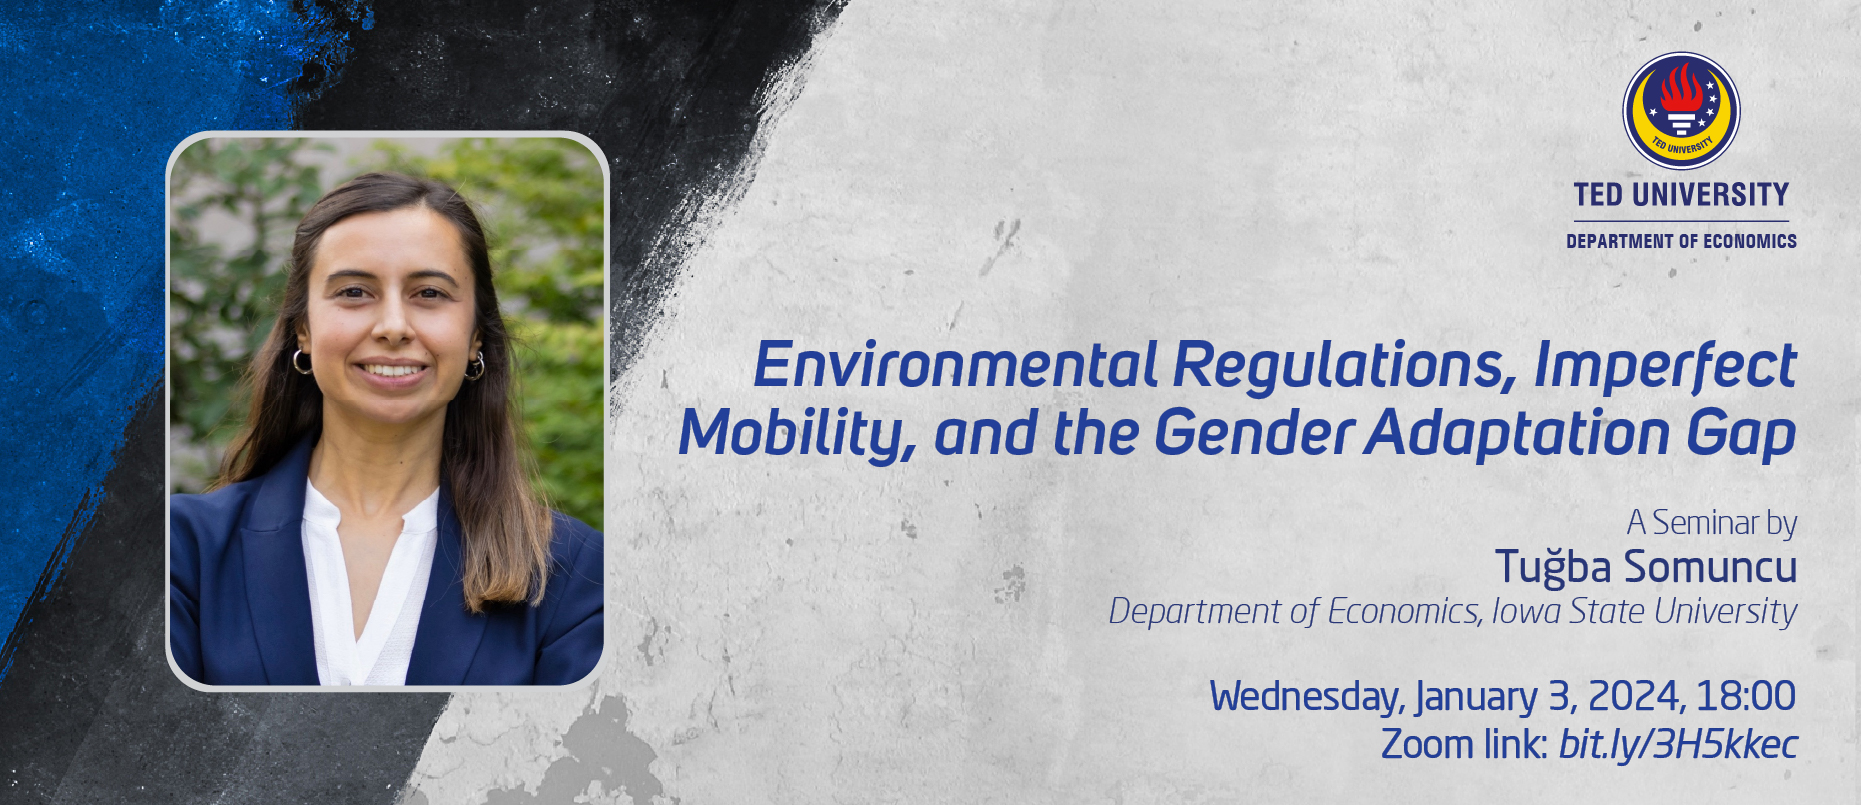 Environmental Regulations, Imperfect Mobility, and the Gender Adaptation Gap